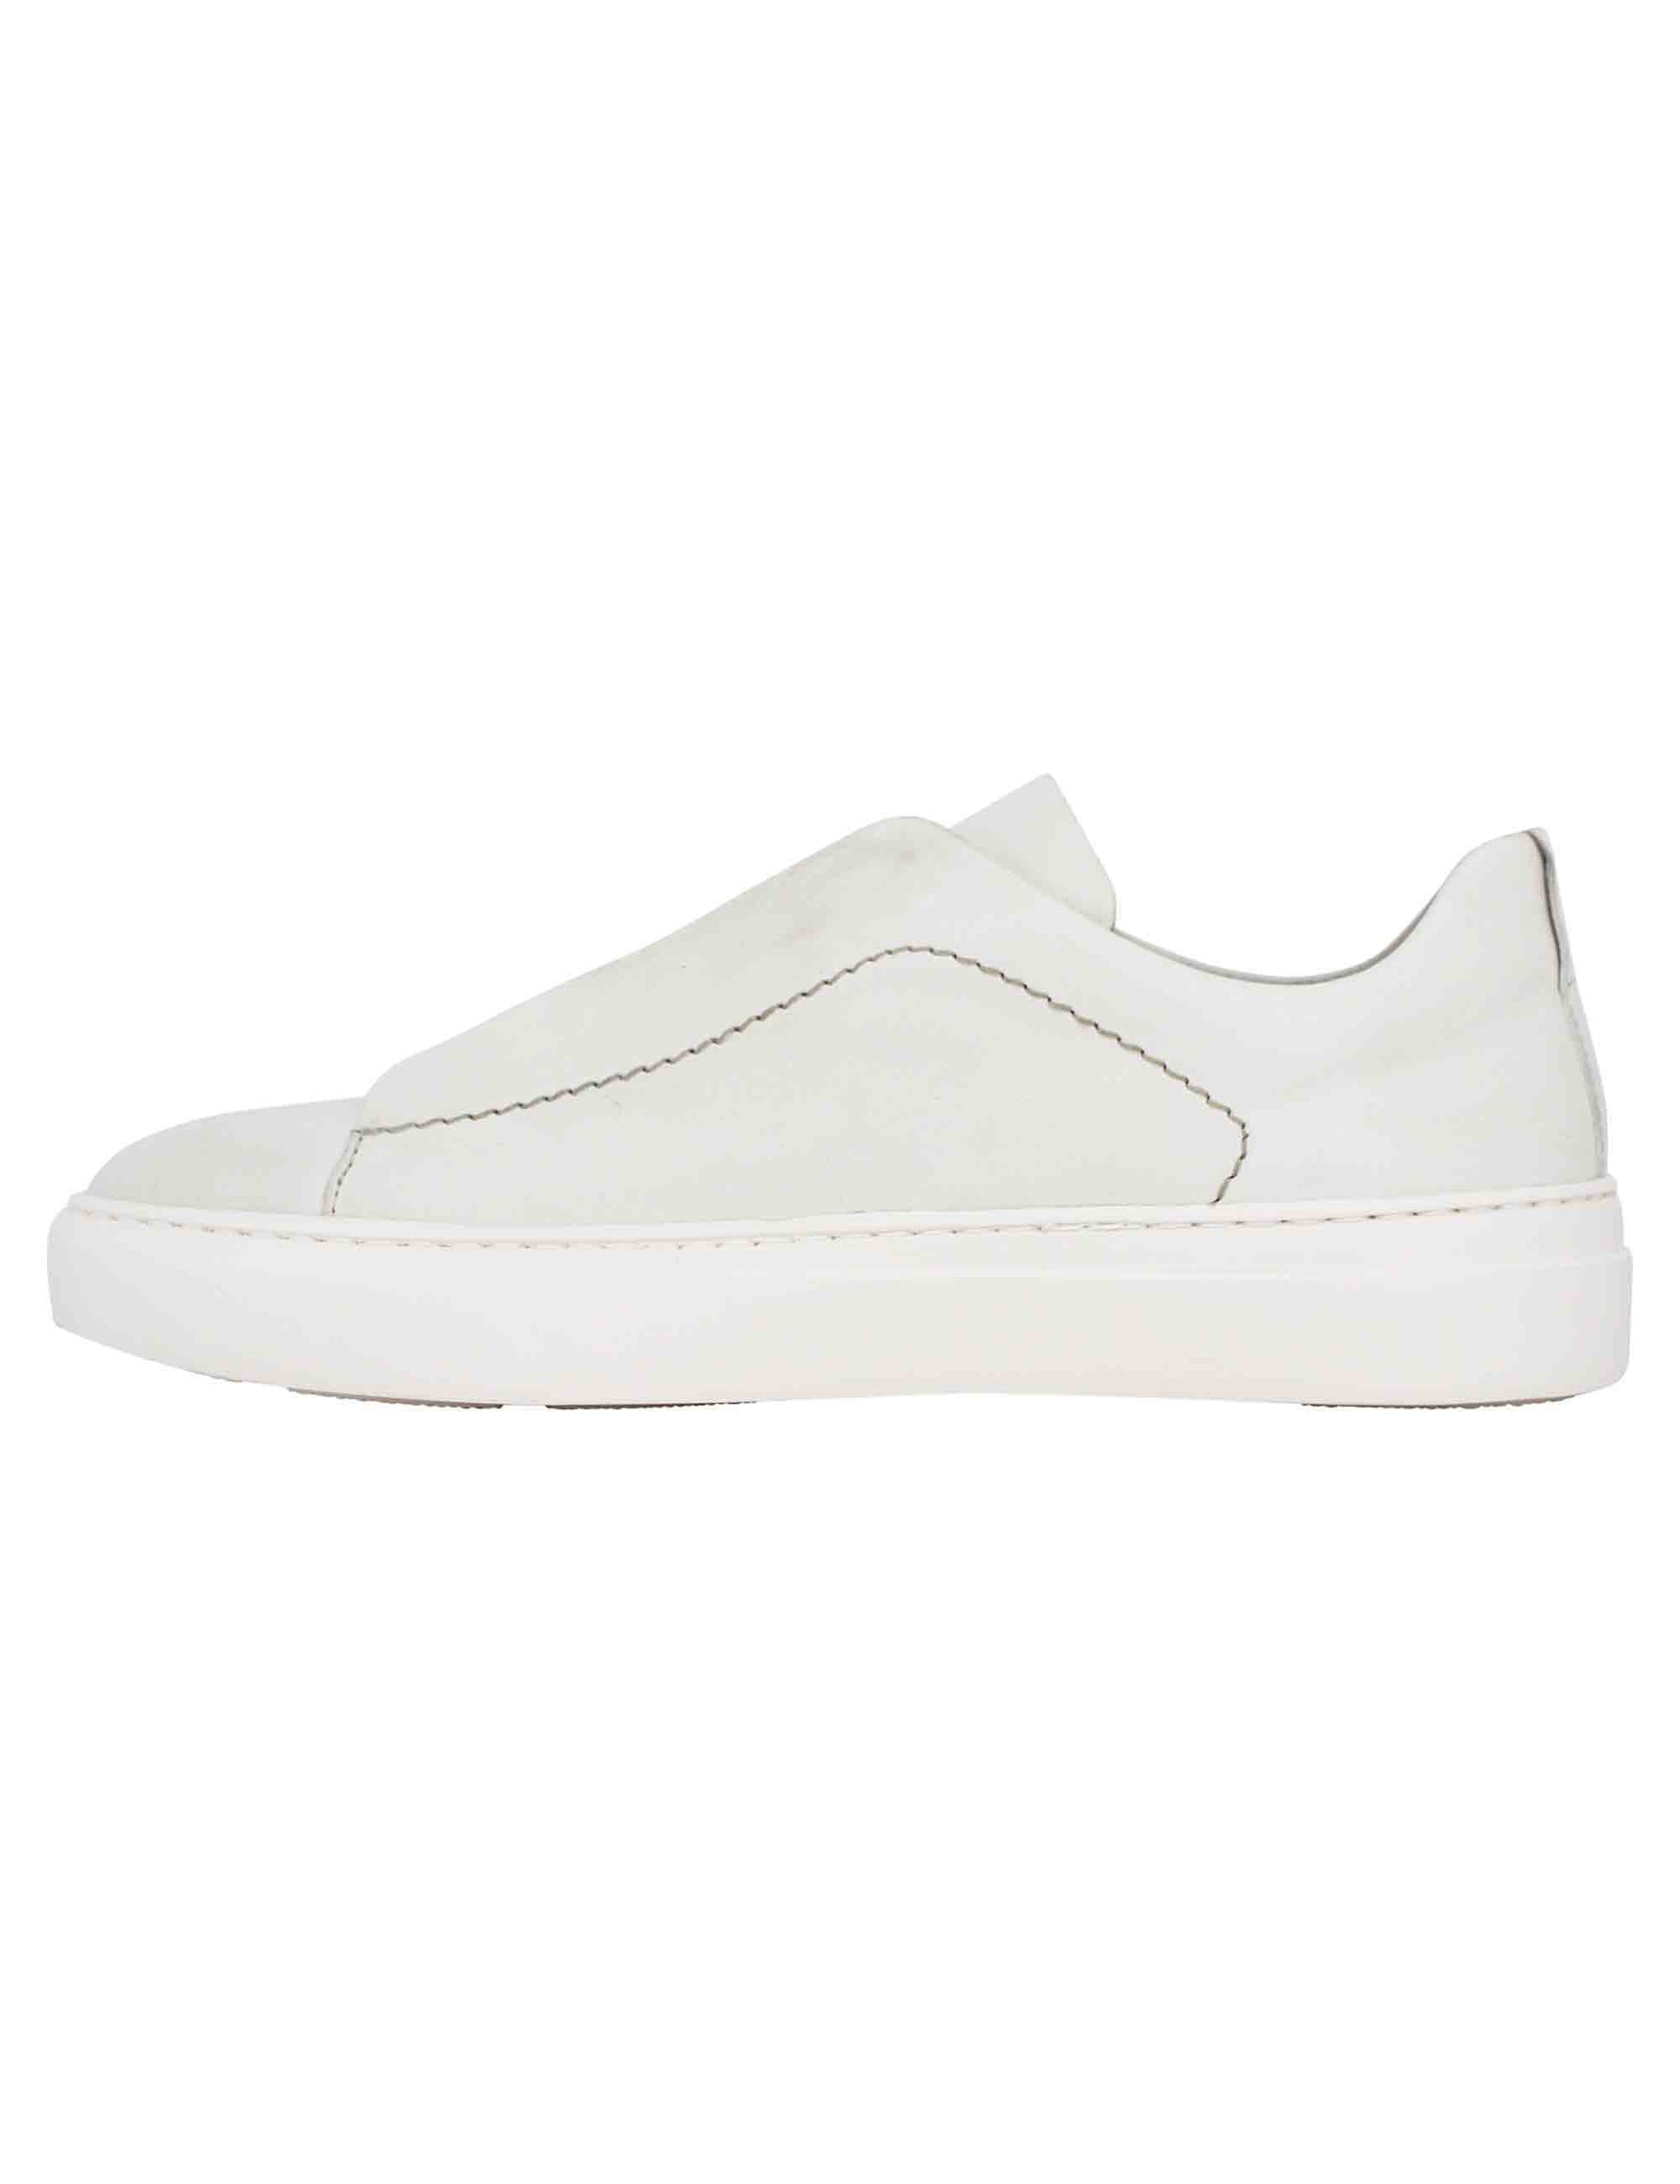 Men's white leather sneakers with elastic